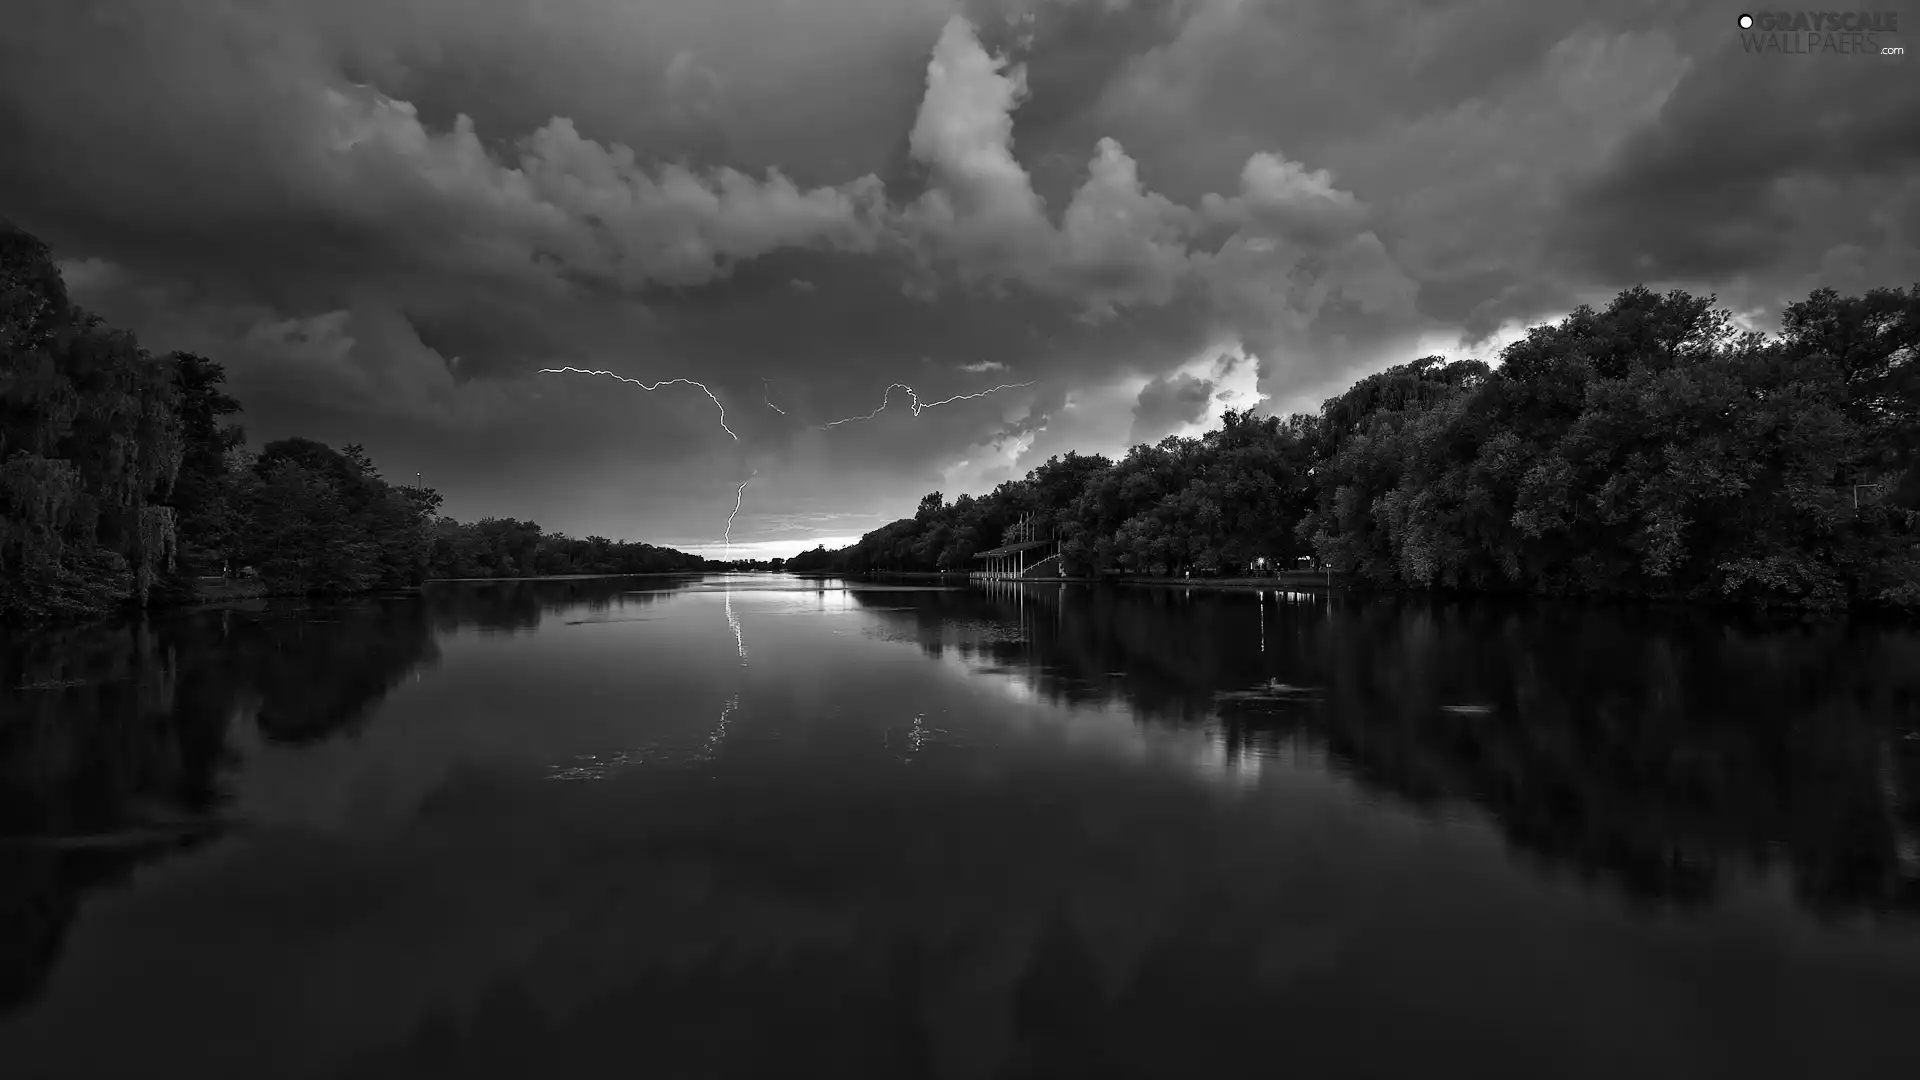 high, The Gathering, Storm, River